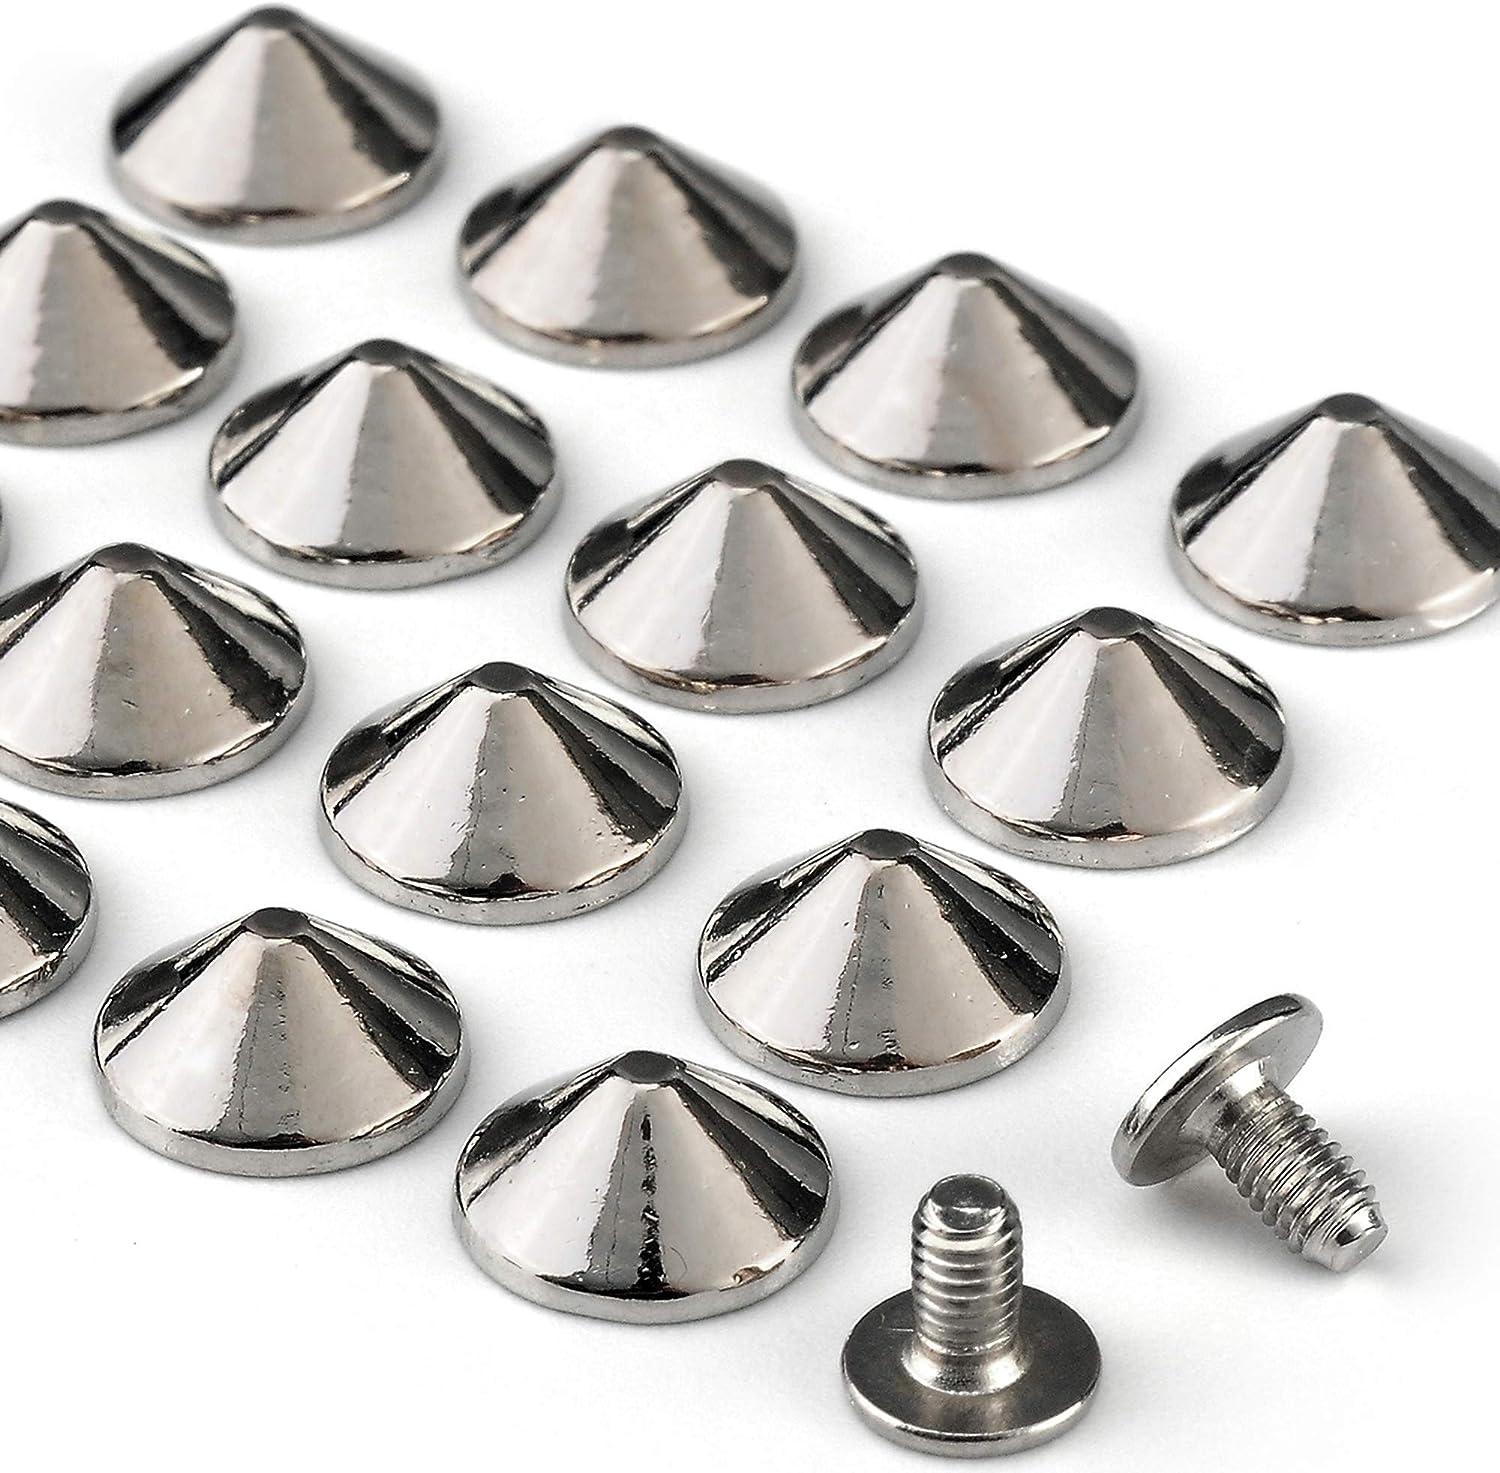 YORANYO 100 Sets Cone Spikes and Studs 4.7MM Height Silver Color 3